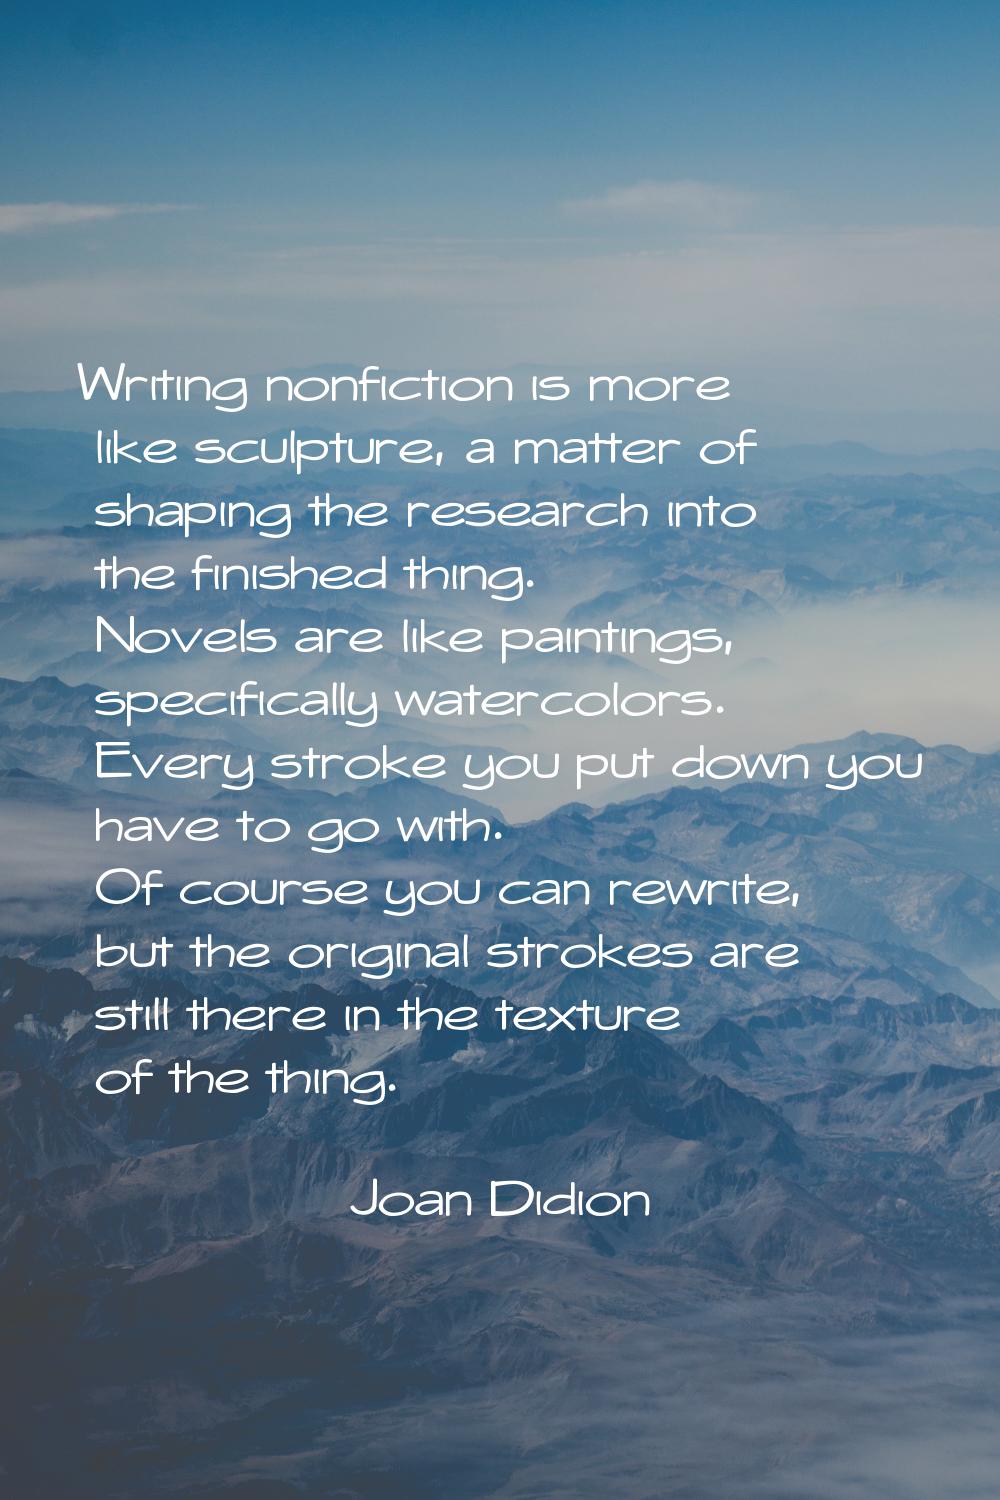 Writing nonfiction is more like sculpture, a matter of shaping the research into the finished thing